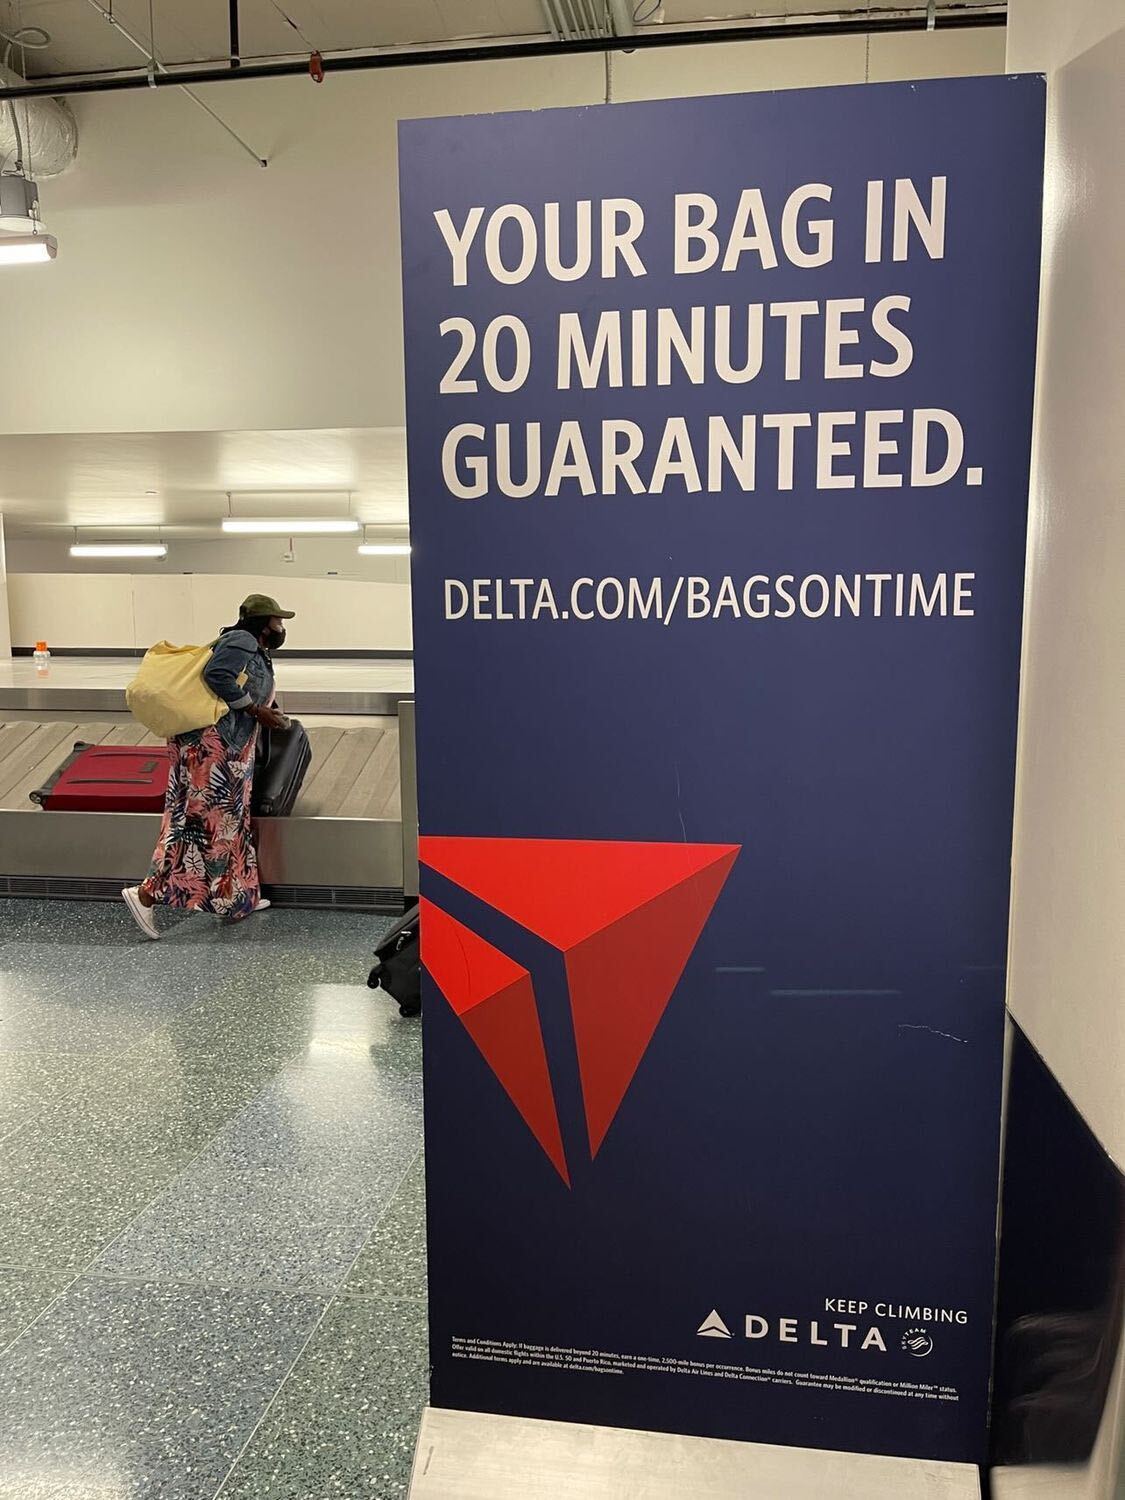 delta on-time bags guarantee